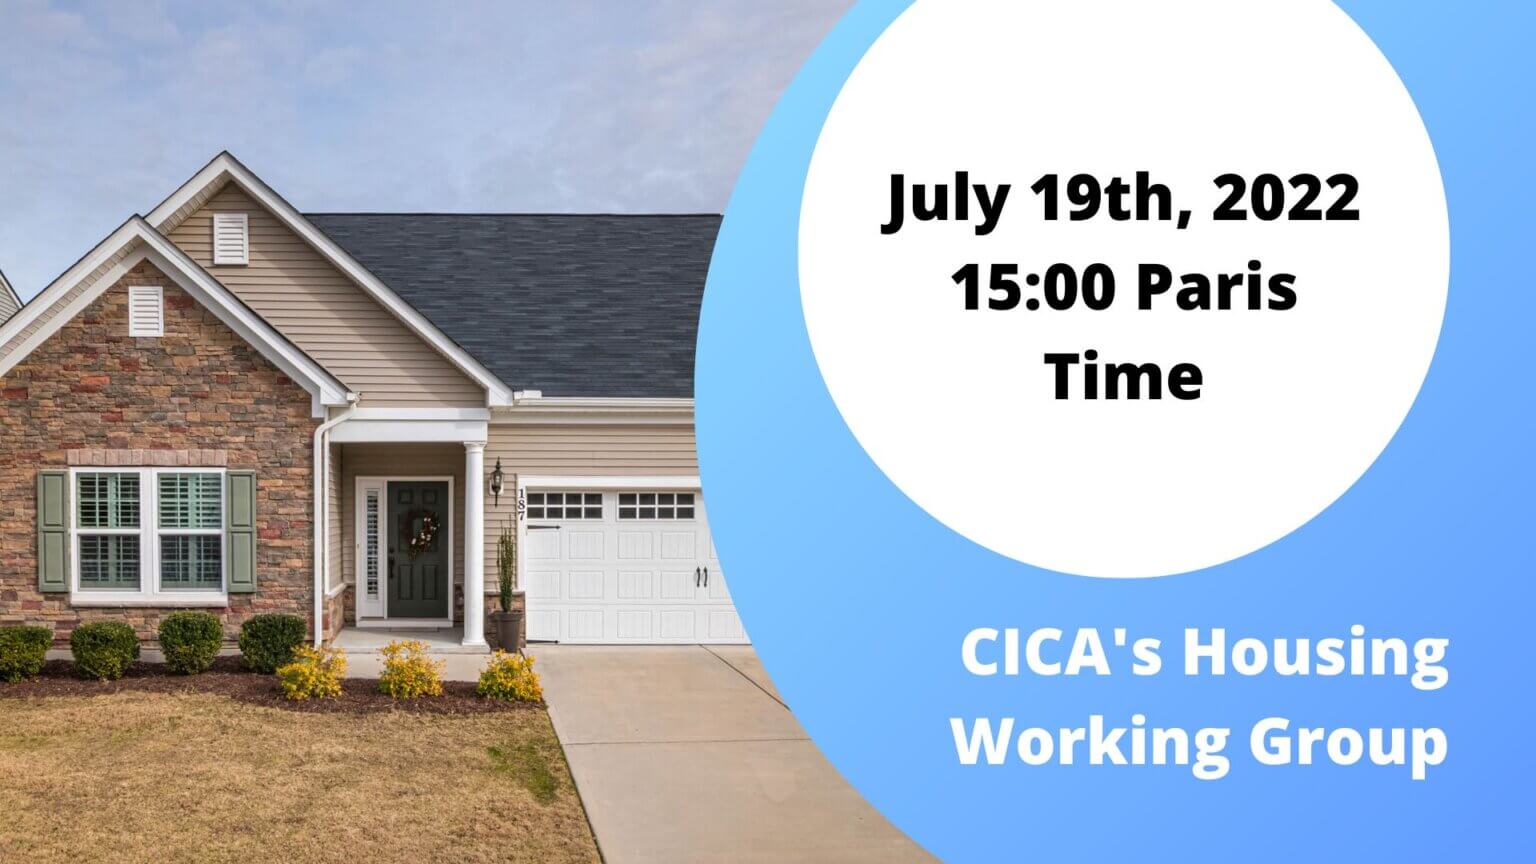 CICA's Housing working group on July 19th